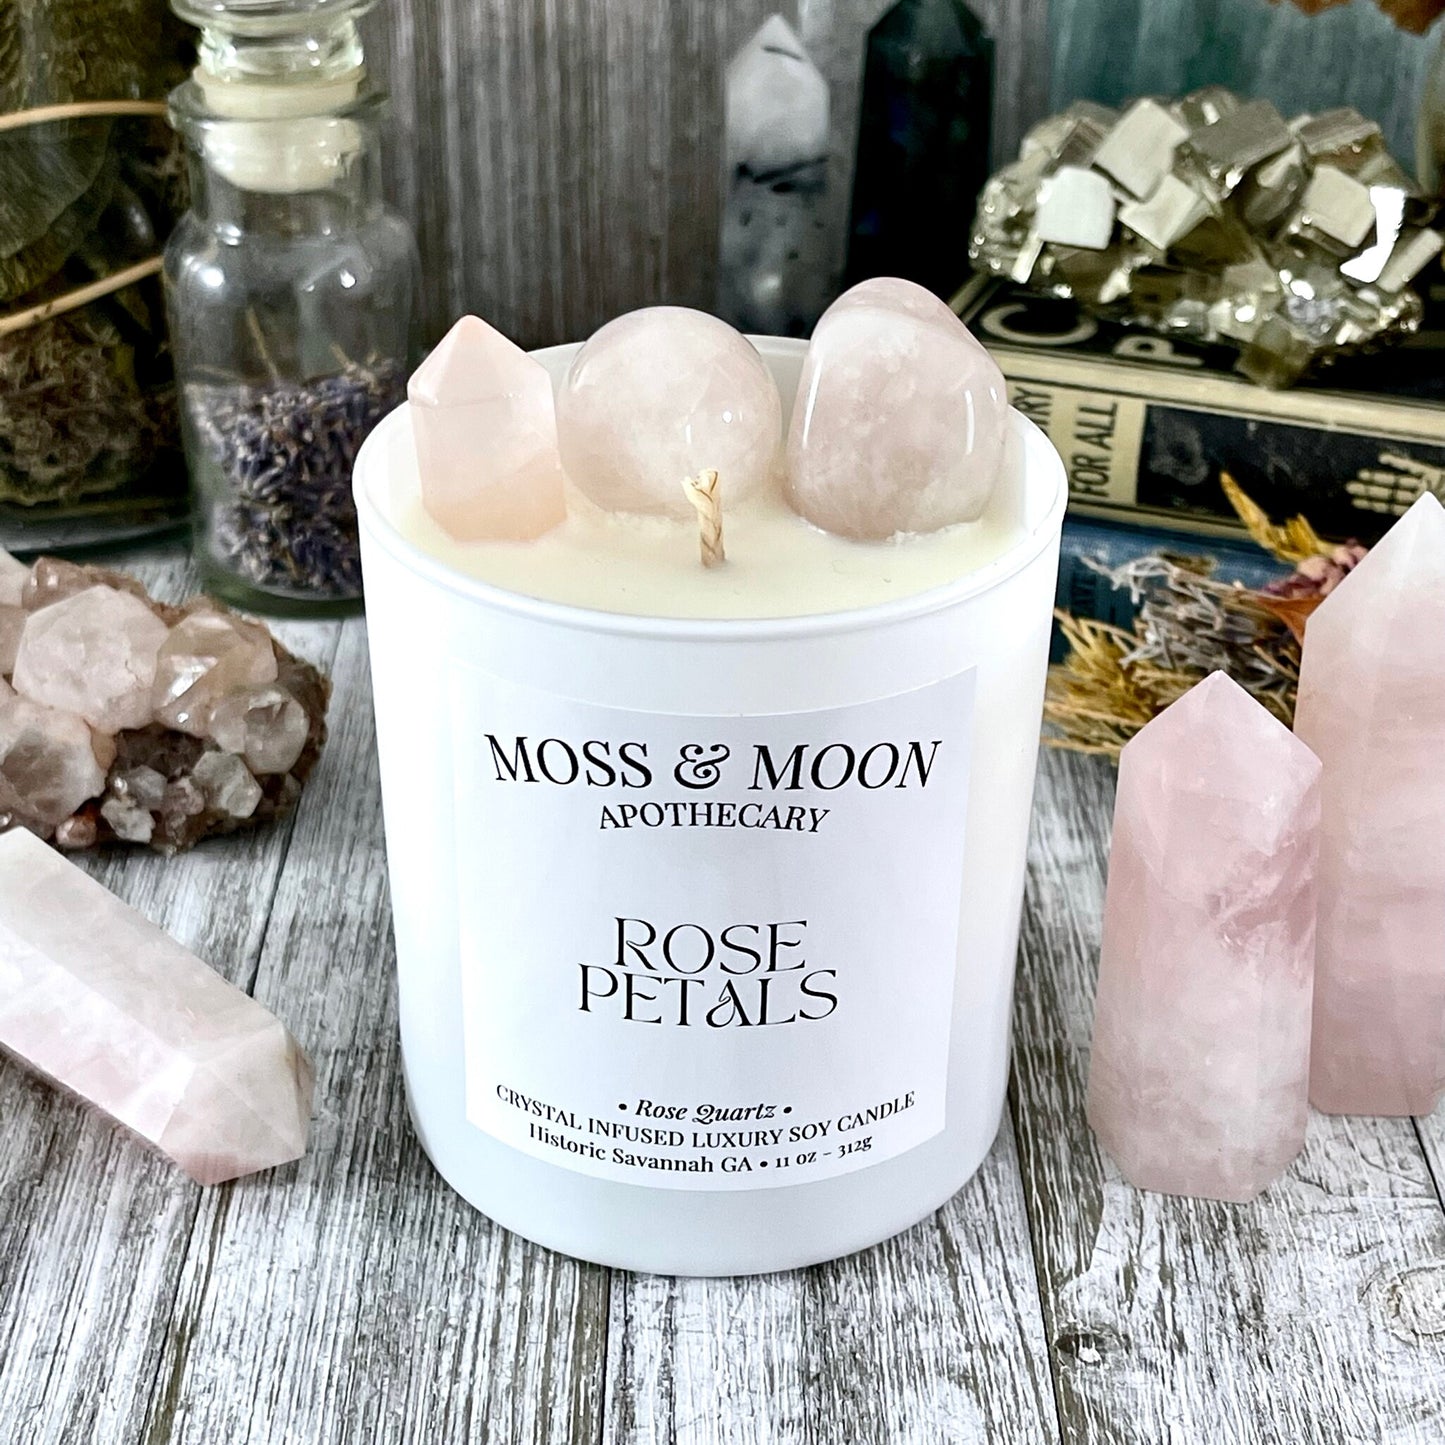 Rose Petals Candle with Rose Quartz - Moss & Moon Apothecary Crystal Infused Luxury Soy Candle